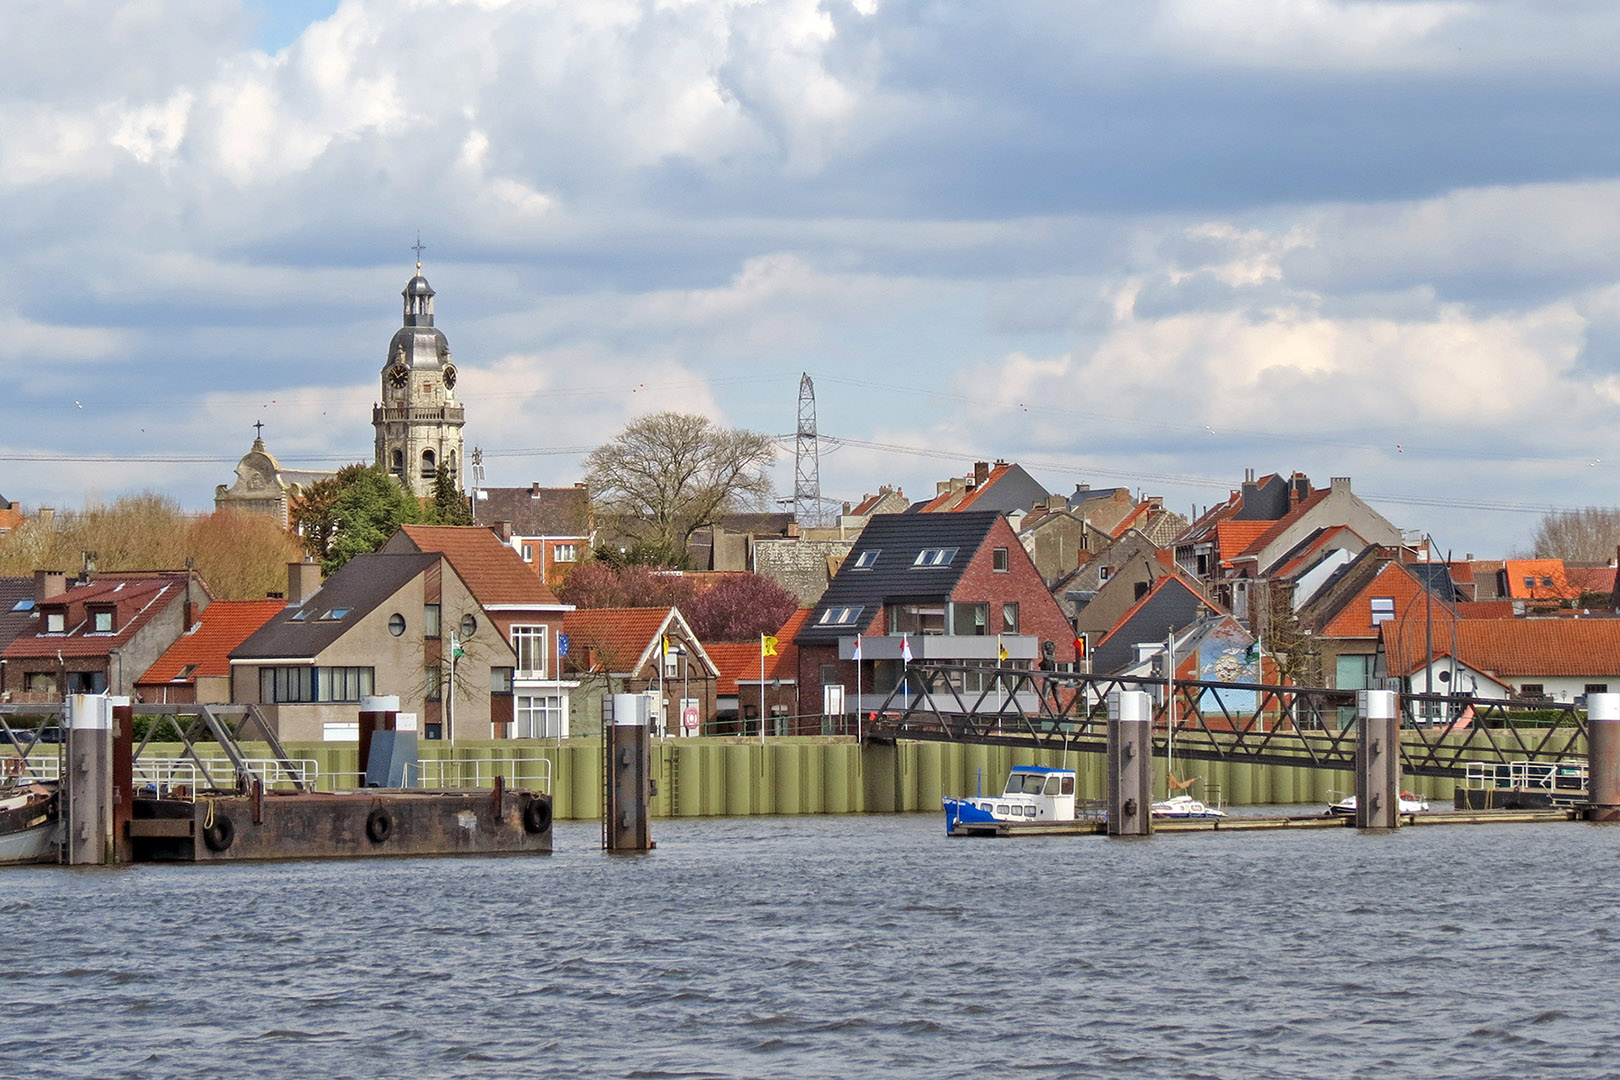 fotoreeks Discover the Scheldeland by boat with visits to Rupelmonde and Sint-Amands, departing from Schellebelle or Dendermonde